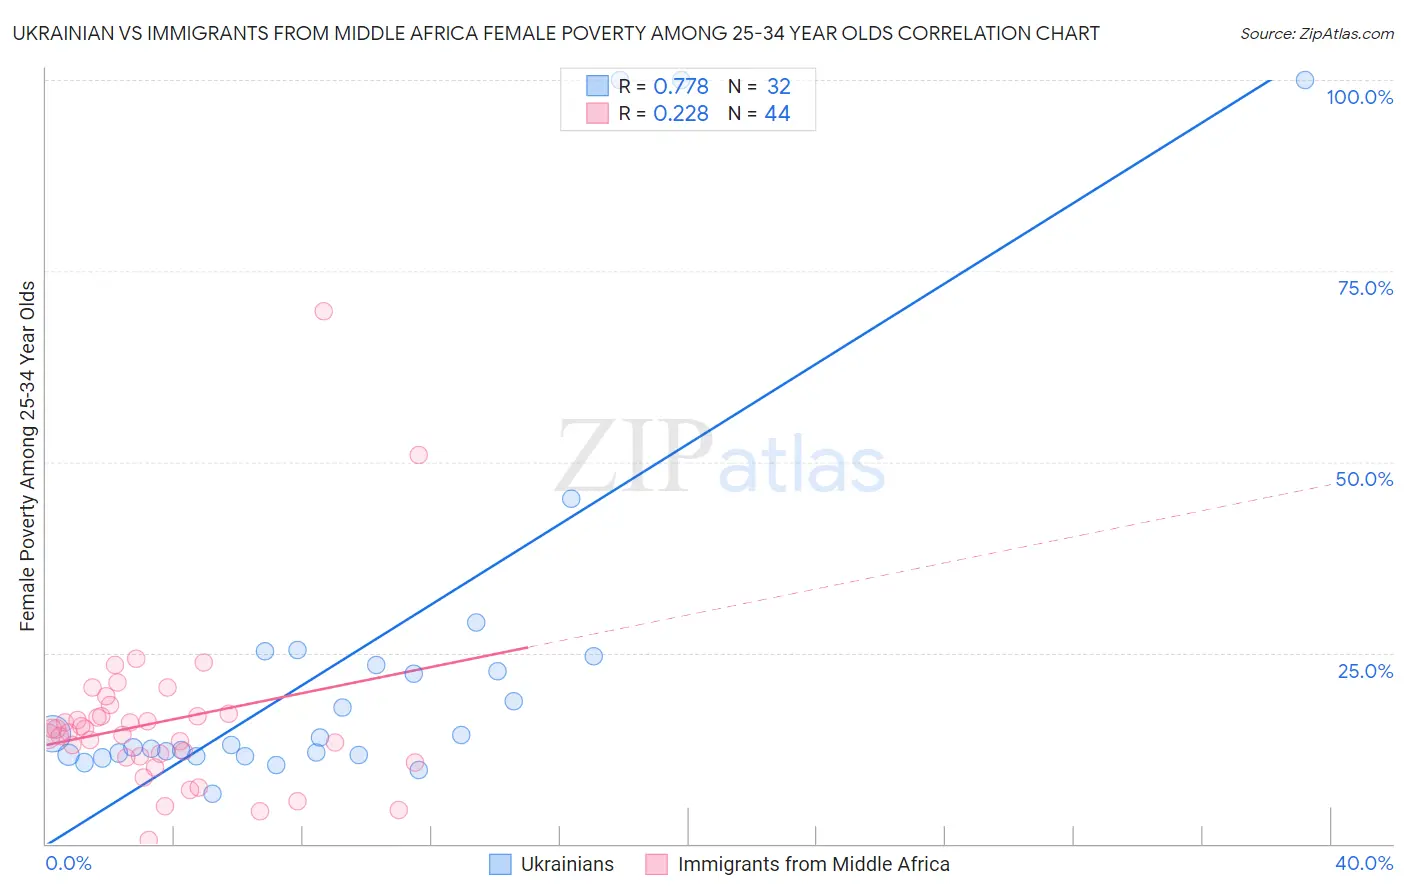 Ukrainian vs Immigrants from Middle Africa Female Poverty Among 25-34 Year Olds